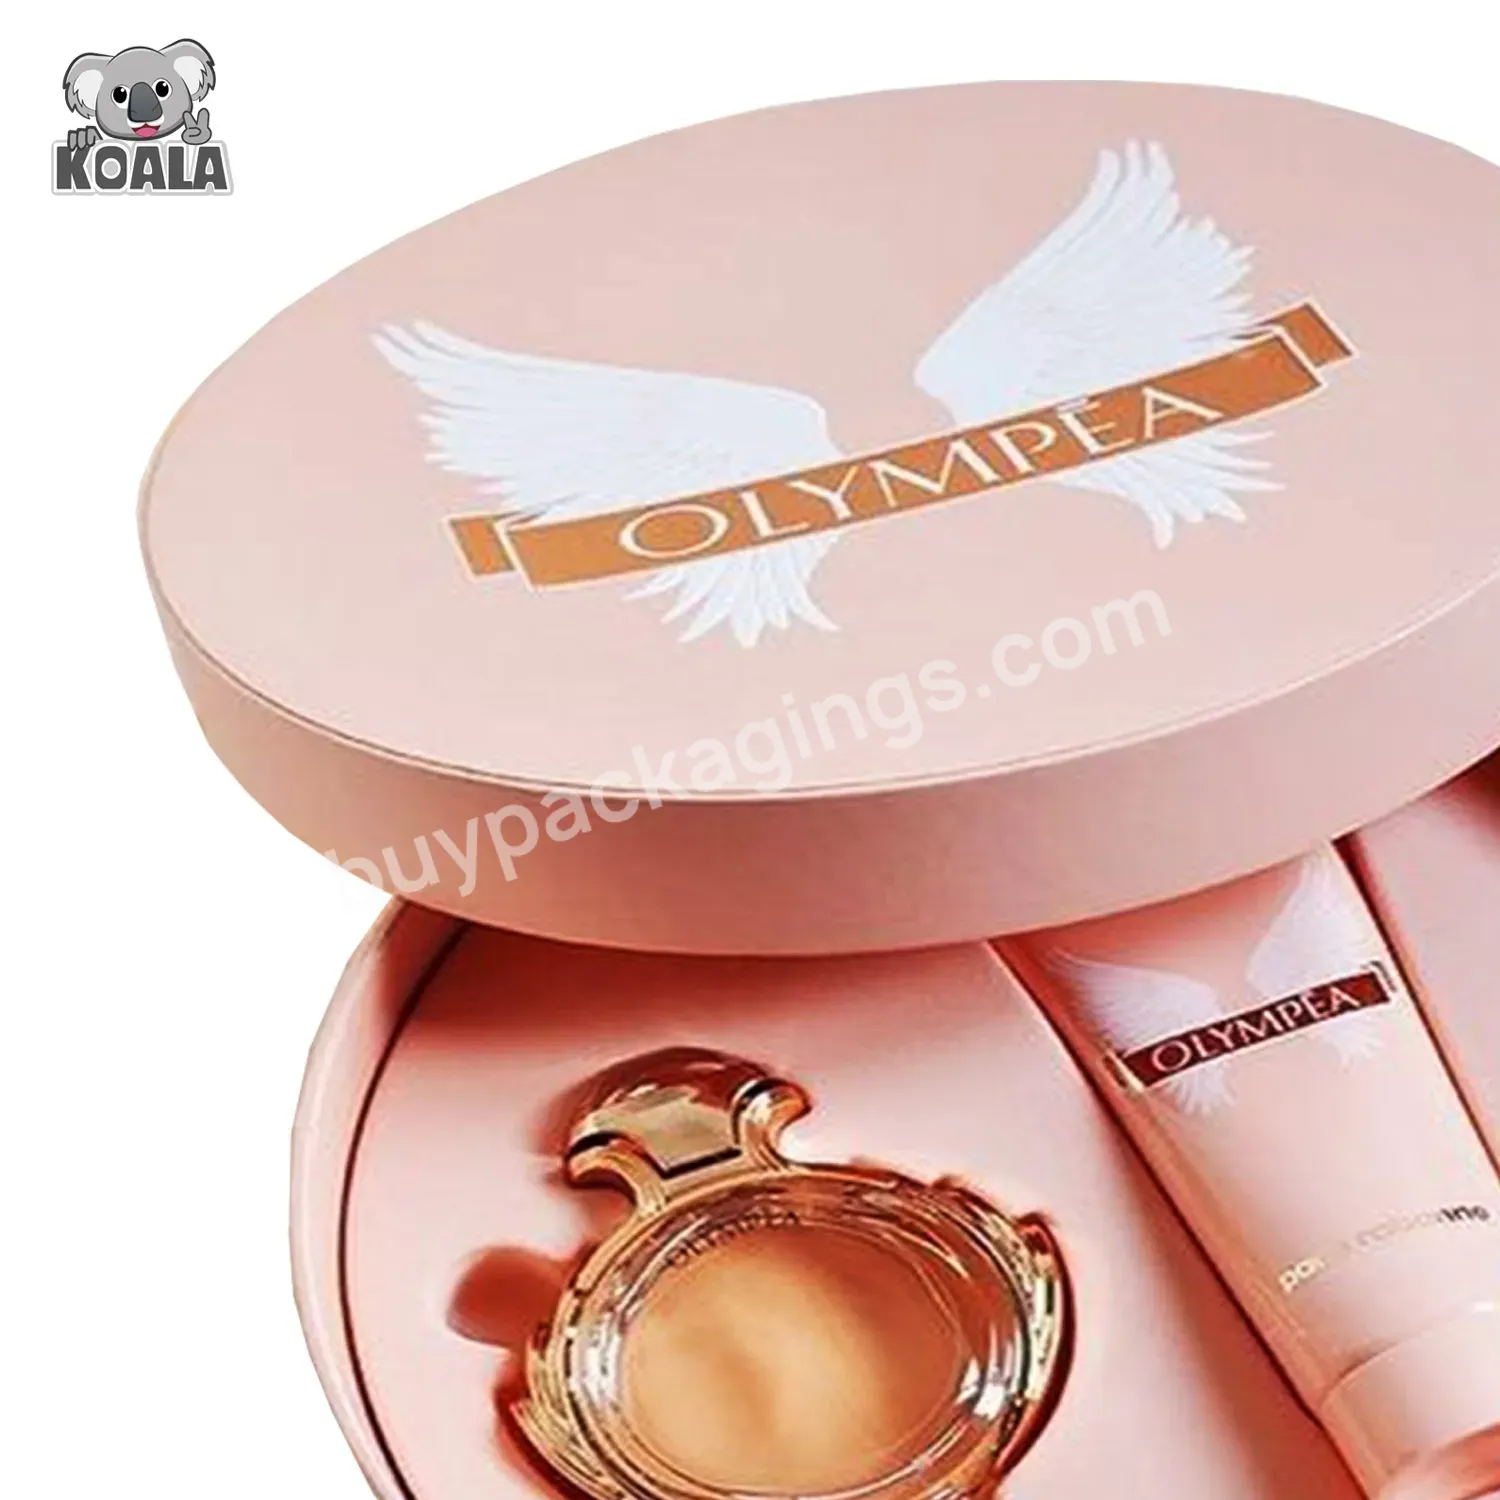 Luxury Girls And Women Pink Round Tube Paper Florist Floral Cosmetics Perfume Set Hat Gift Box